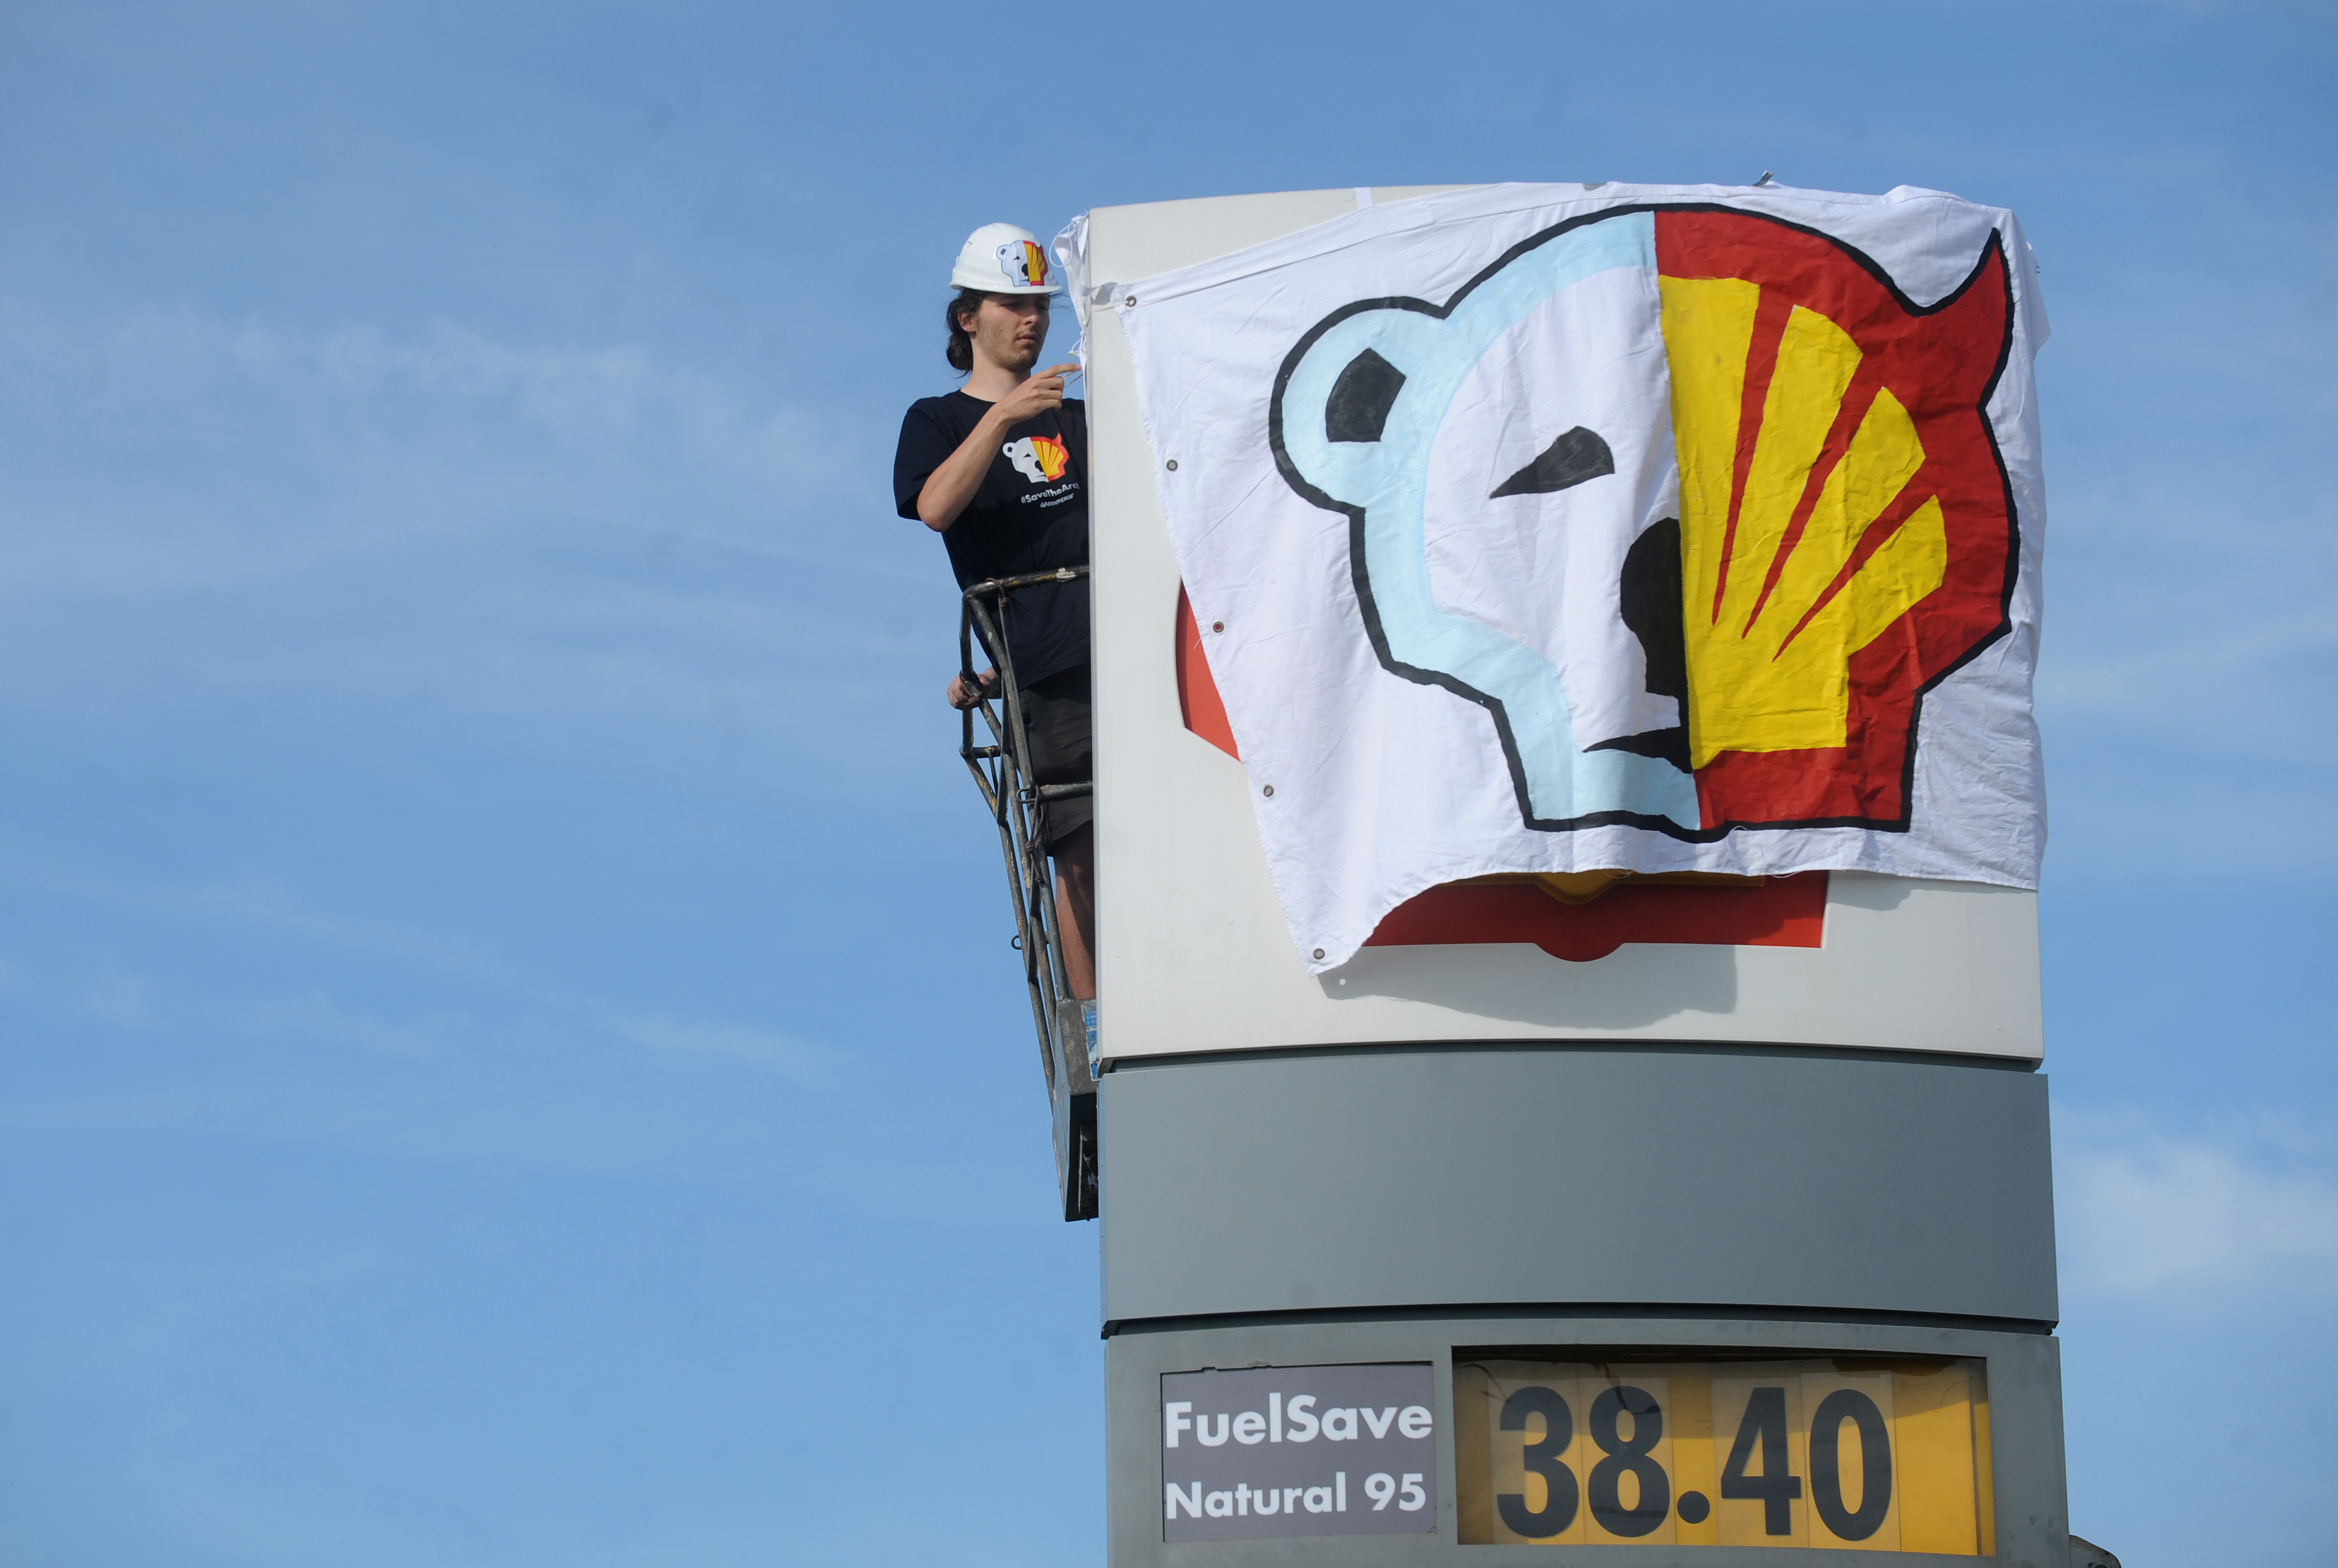 A Greenpeace activist covers the logo of the Shell oil company to protest Shell's Arctic oil drilling project in the north of Alaska. (MICHAL CIZEK&mdash;AFP/Getty Images)